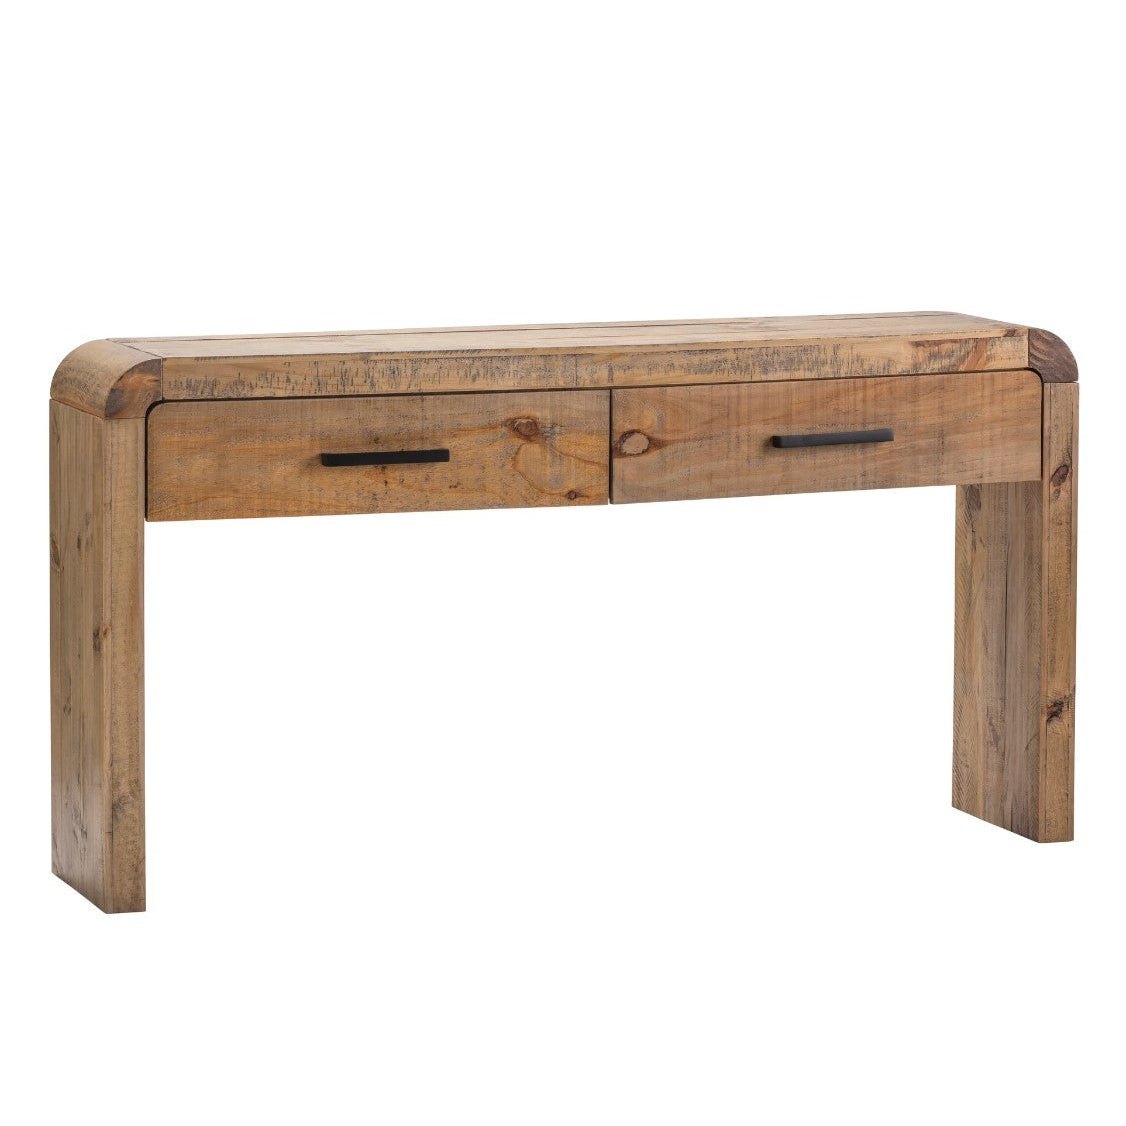 Crestview Collection Pleasant Grove 64" x 14" x 13" Transitional Metal And Wood Console In Light Wood Finish